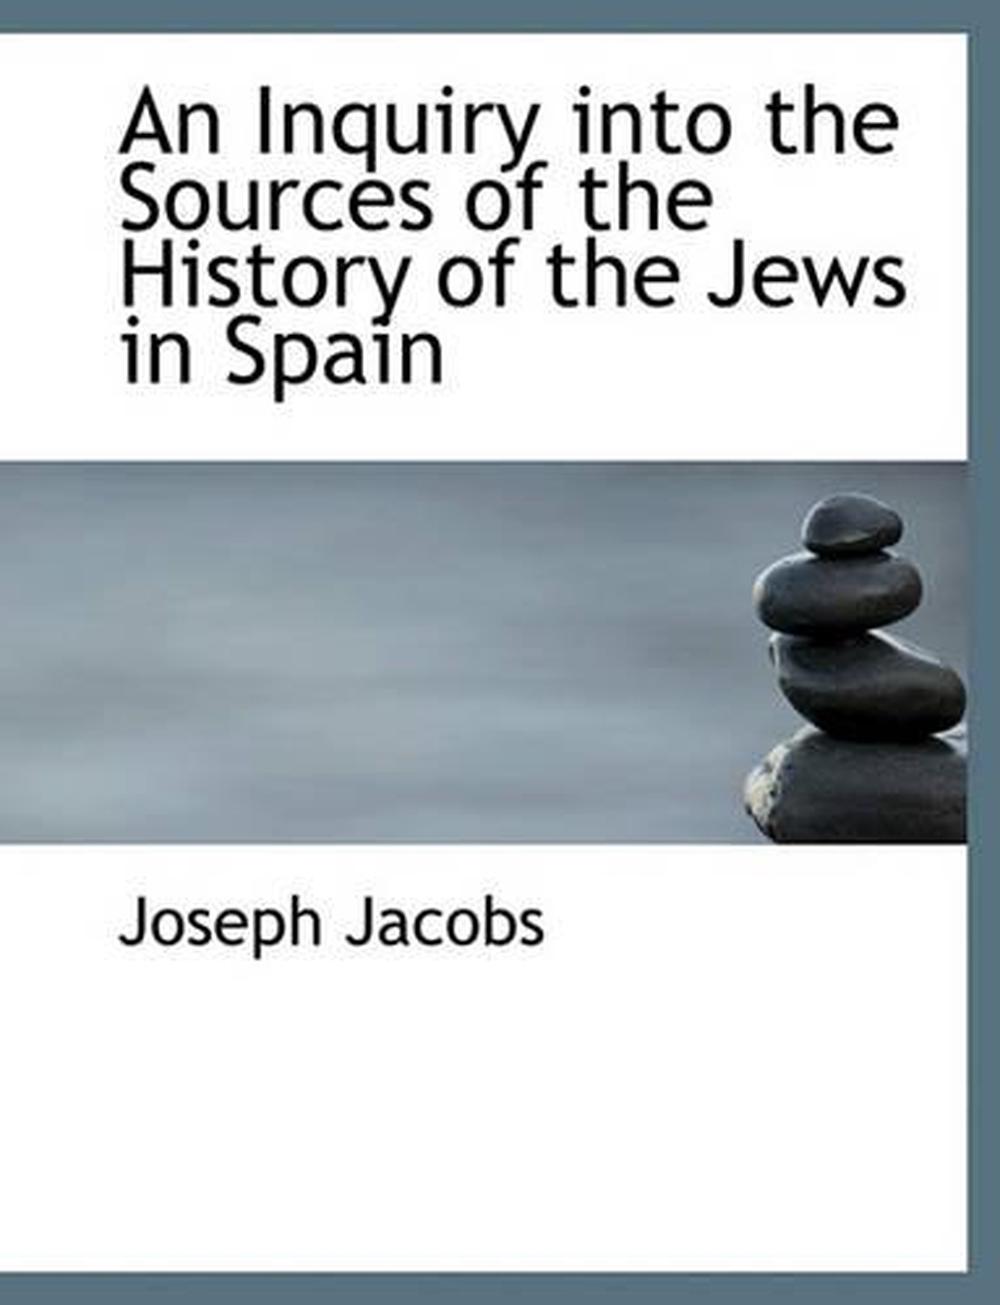 An Inquiry Into the Sources of the History of the Jews in Spain by